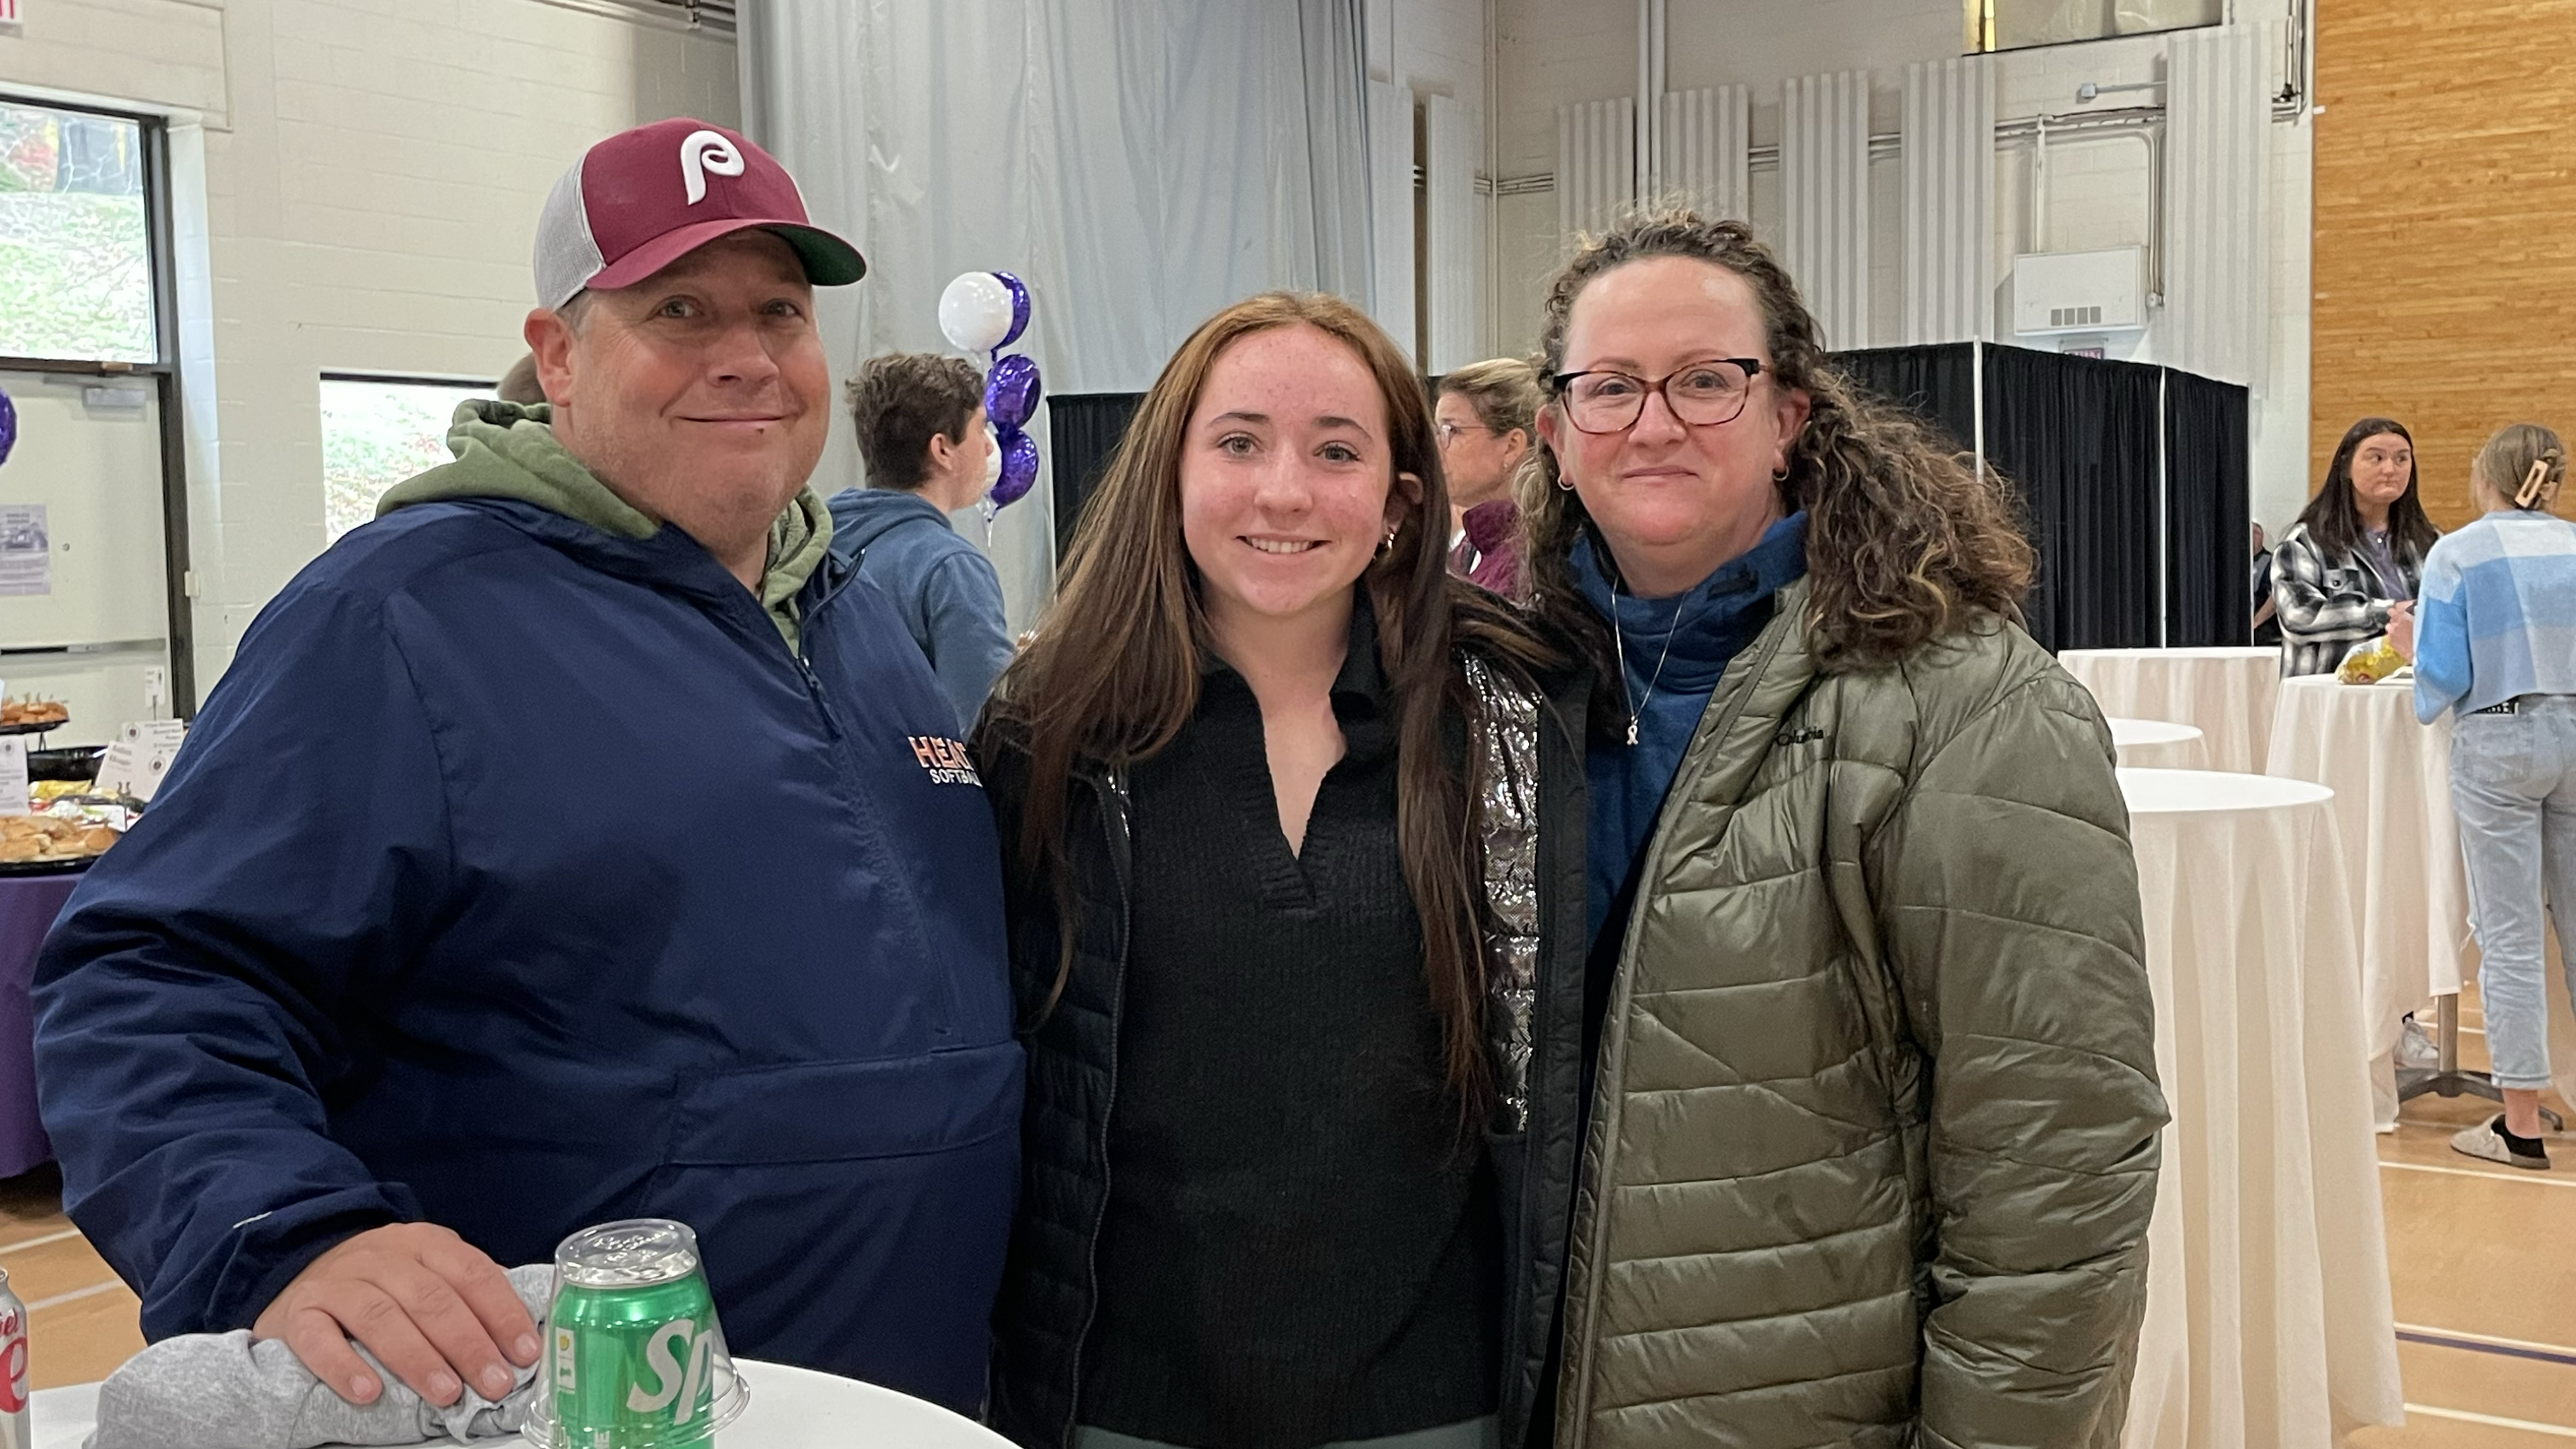 At The University of Scranton Open House on Sunday, Nov. 5, attendees can meet with faculty, students, admissions counselors and financial aid representatives. Emma Douglas, Woolwich Township, New Jersey, shown, attended the Open House on Oct. 22 with her parents Kevin and Katie.